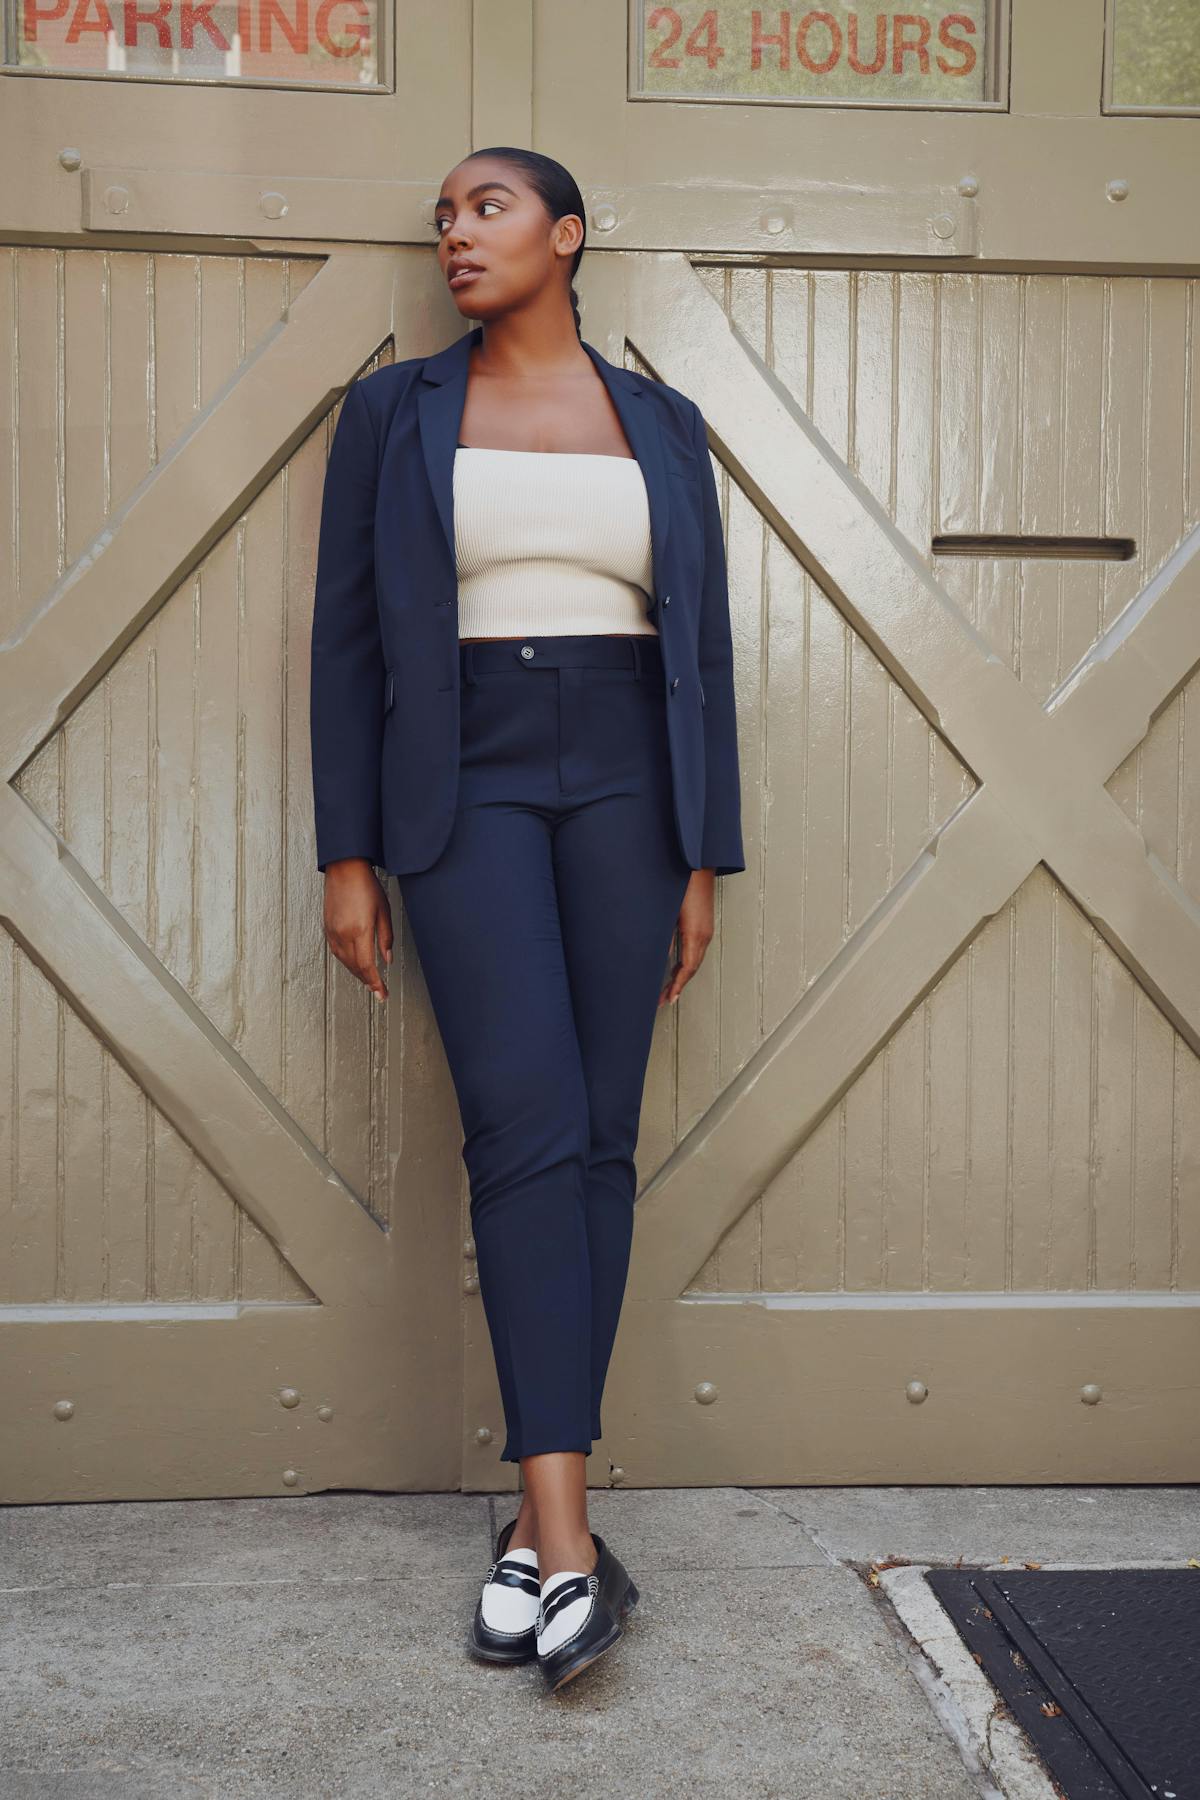 Simple power suit outfit for women with dark blue blazer and suit pants, black and white loafers, and white top to wear to the office.